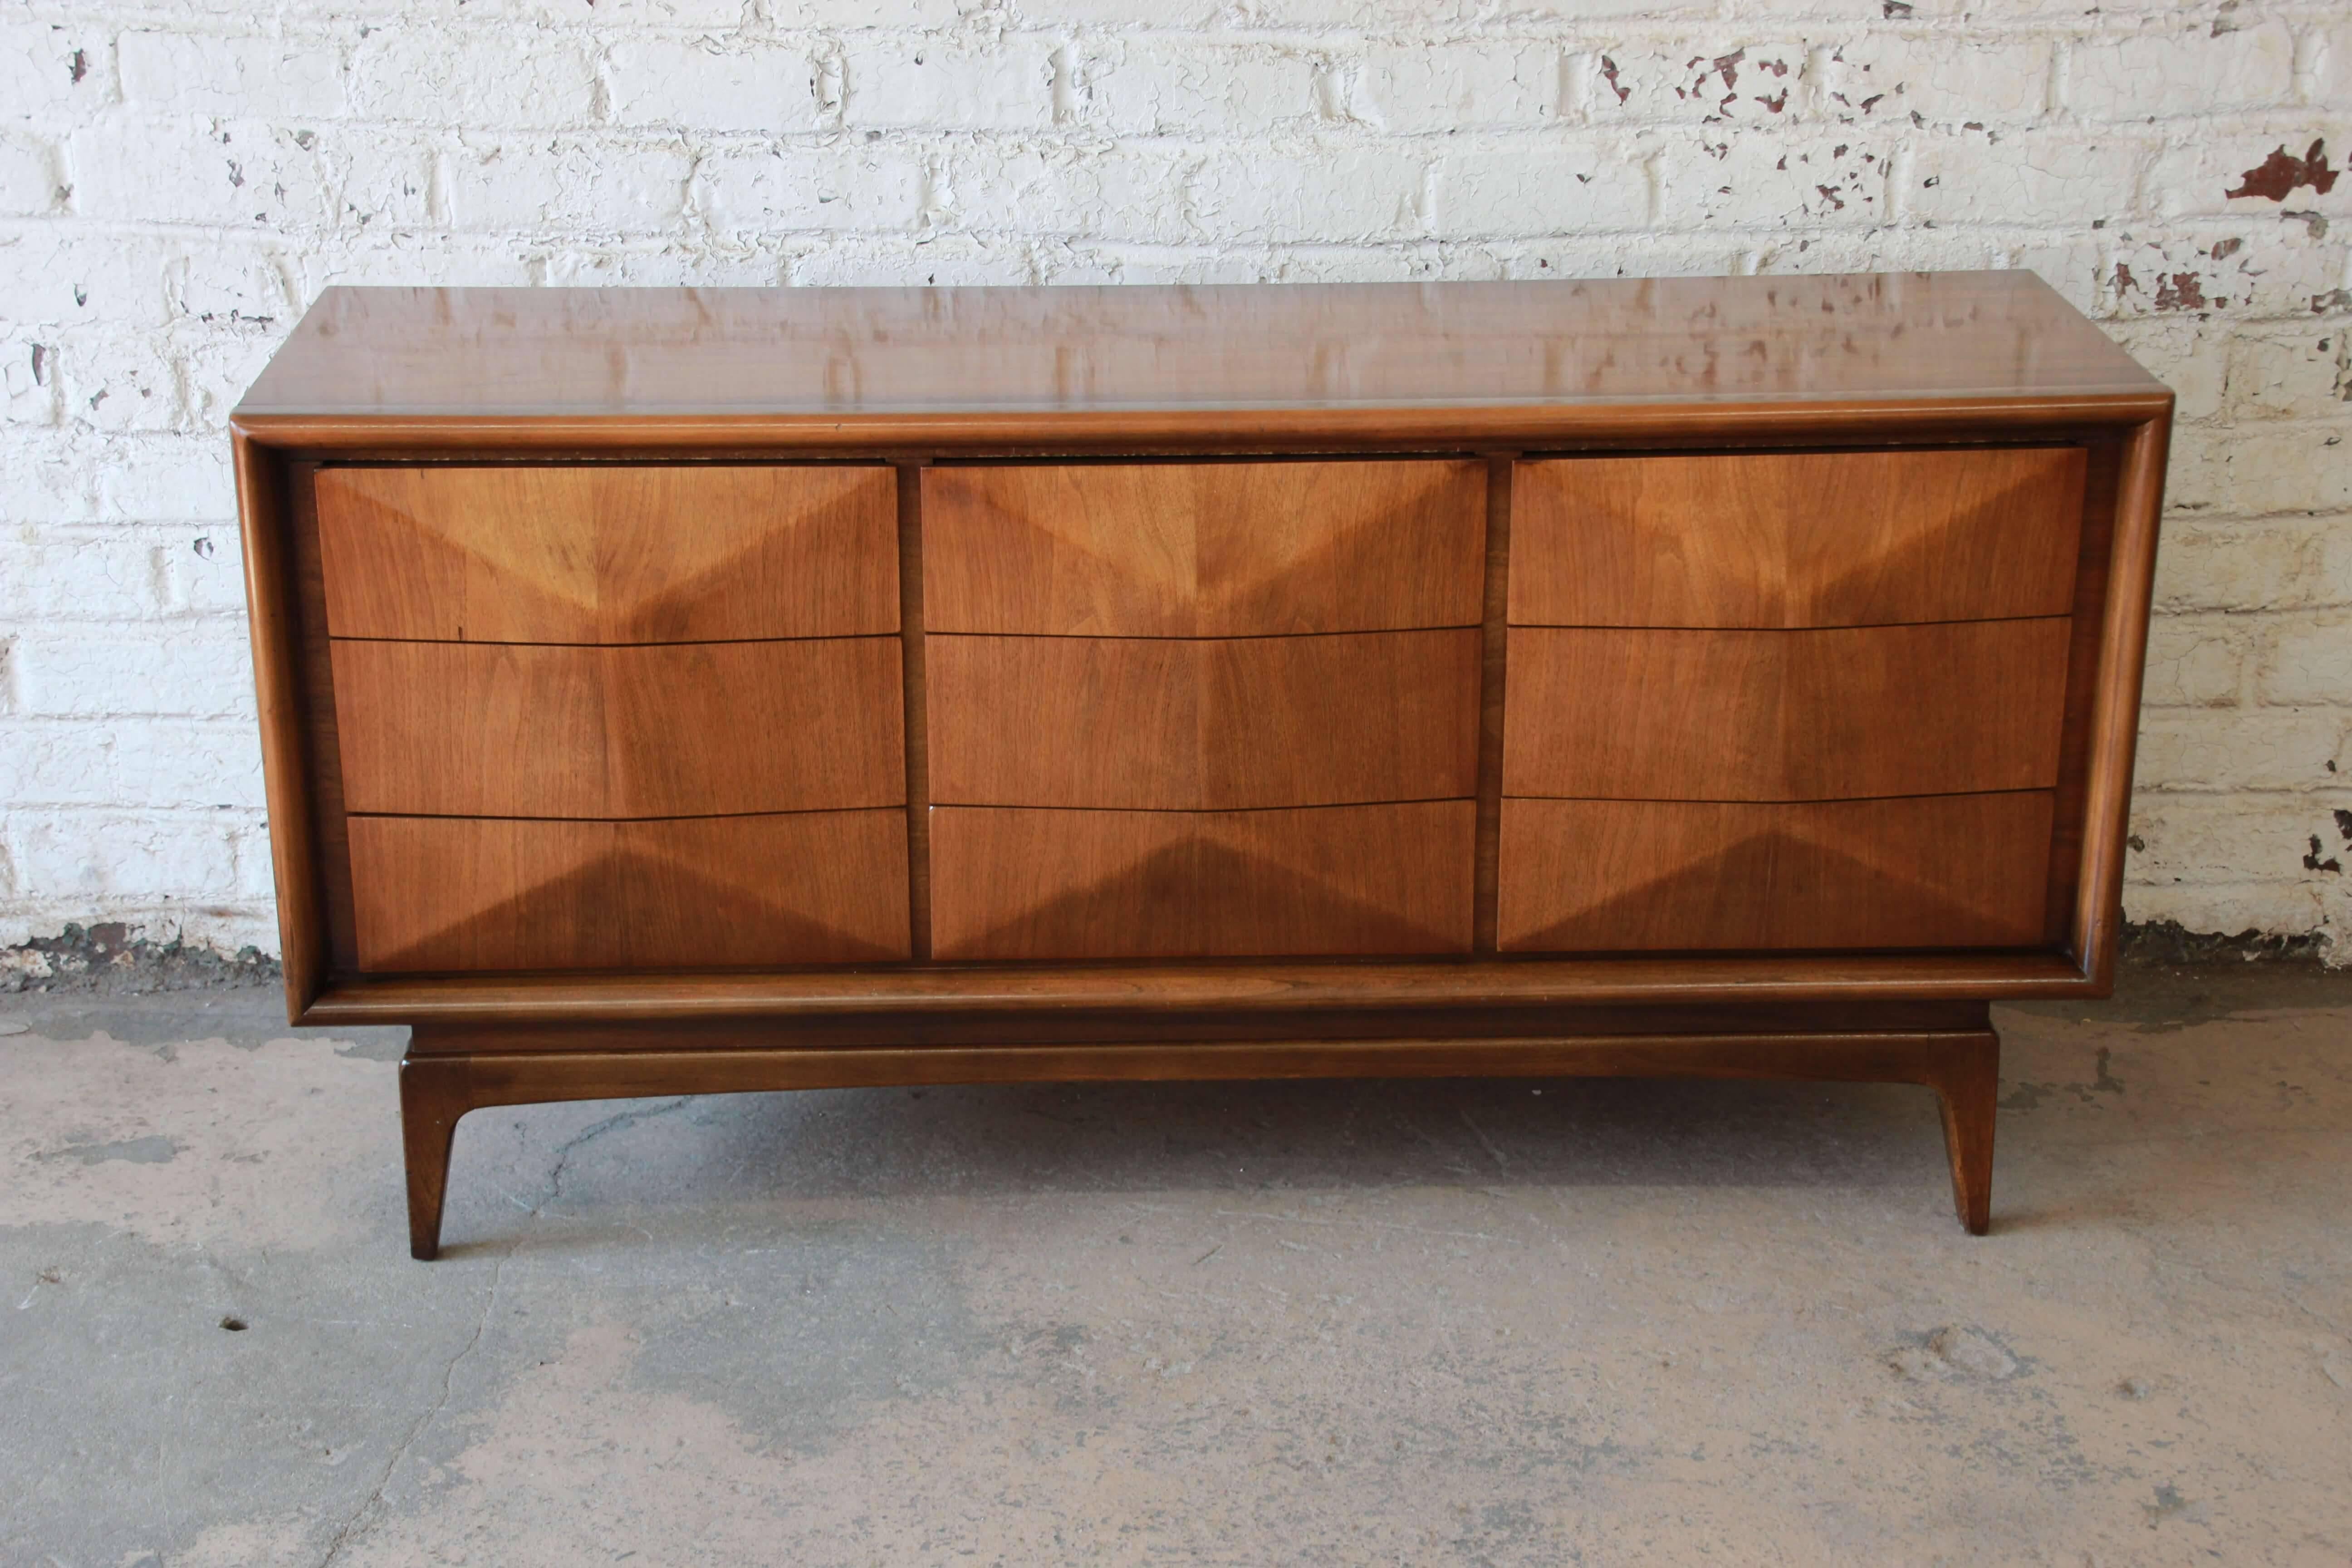 An exceptional and unique Mid-Century Modern diamond front dresser or credenza by United Furniture in the style of Vladimir Kagan. The dresser features stunning walnut wood grain and a sculpted diamond front with nine hefty drawers. It is well